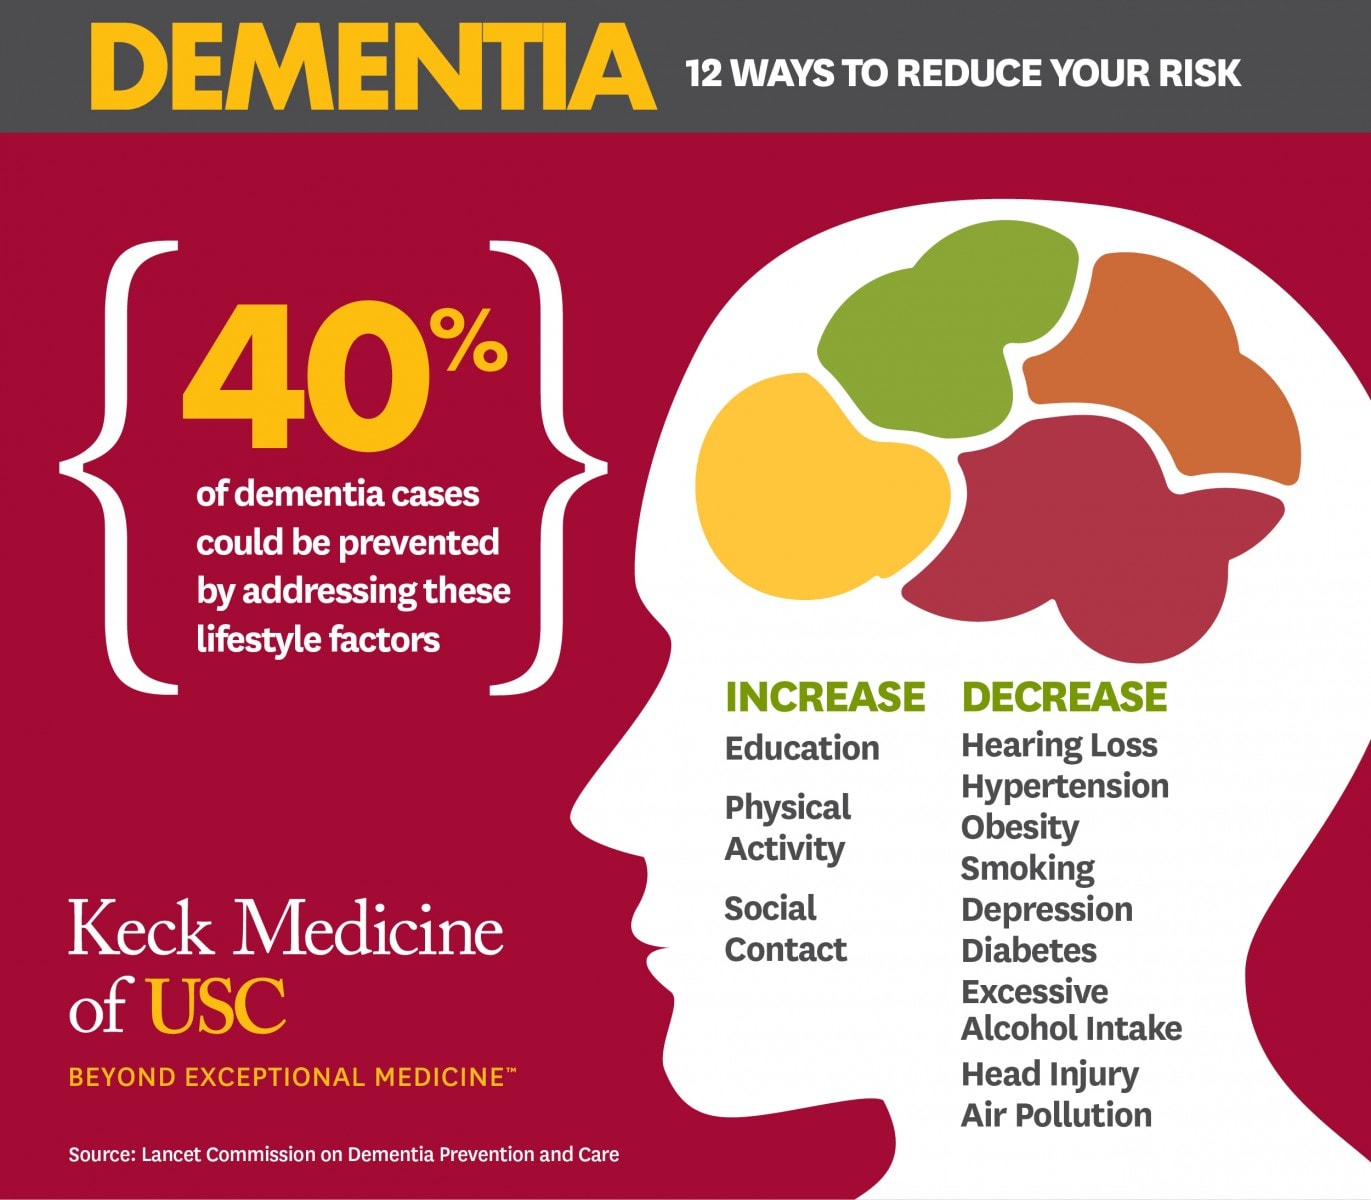 Forty percent of dementia cases could be prevented or delayed by targeting 12 risk factors throughout life, experts say